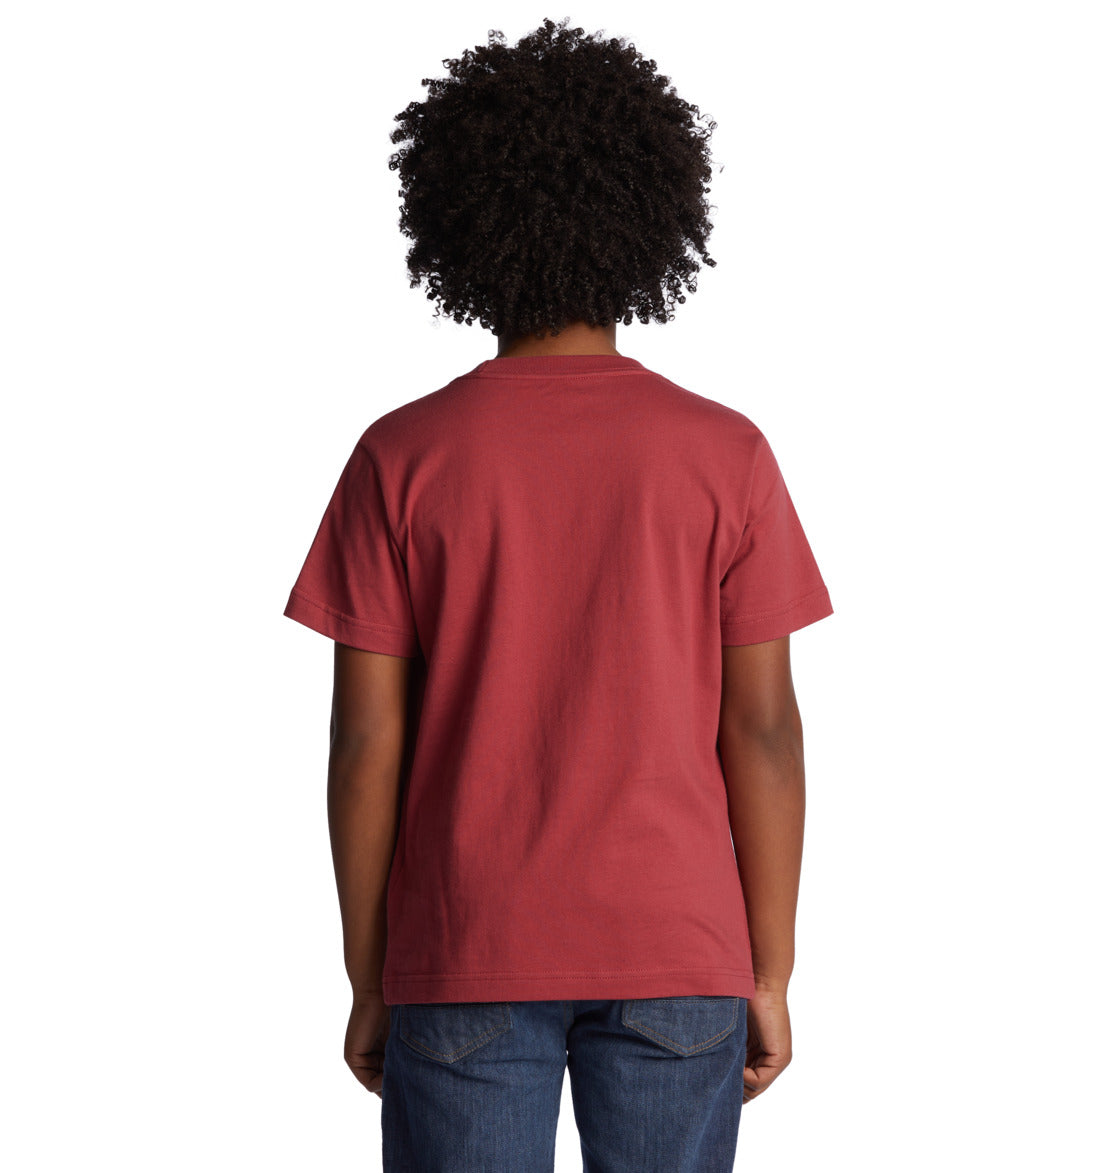 Dc Shoes Camiseta Niño Shatter Red Earth